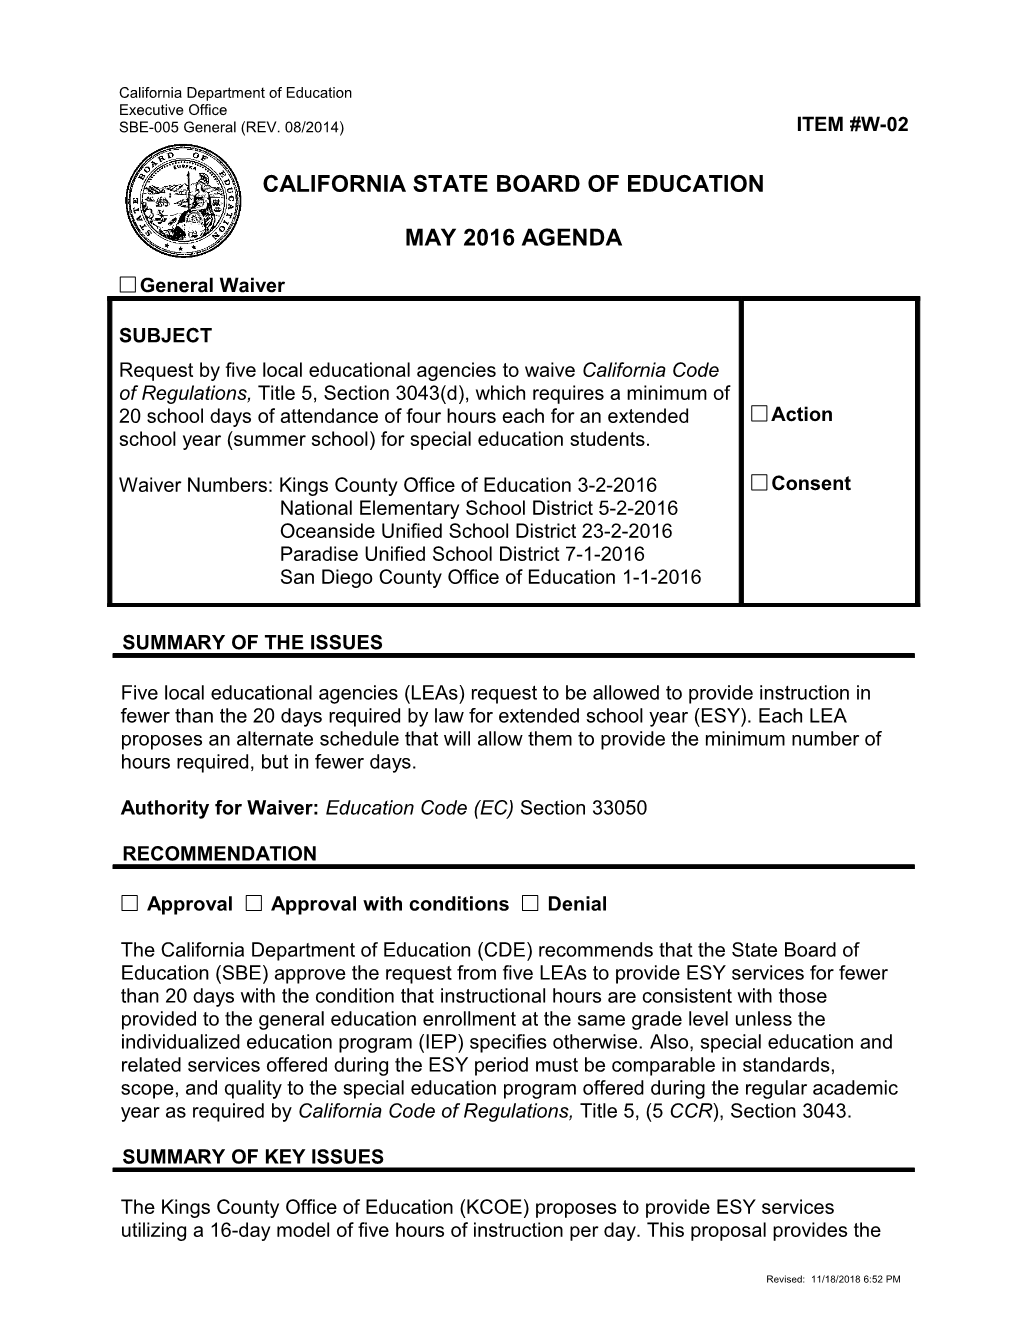 May 2016 Waiver Item W-02 - Meeting Agendas (CA State Board of Education)